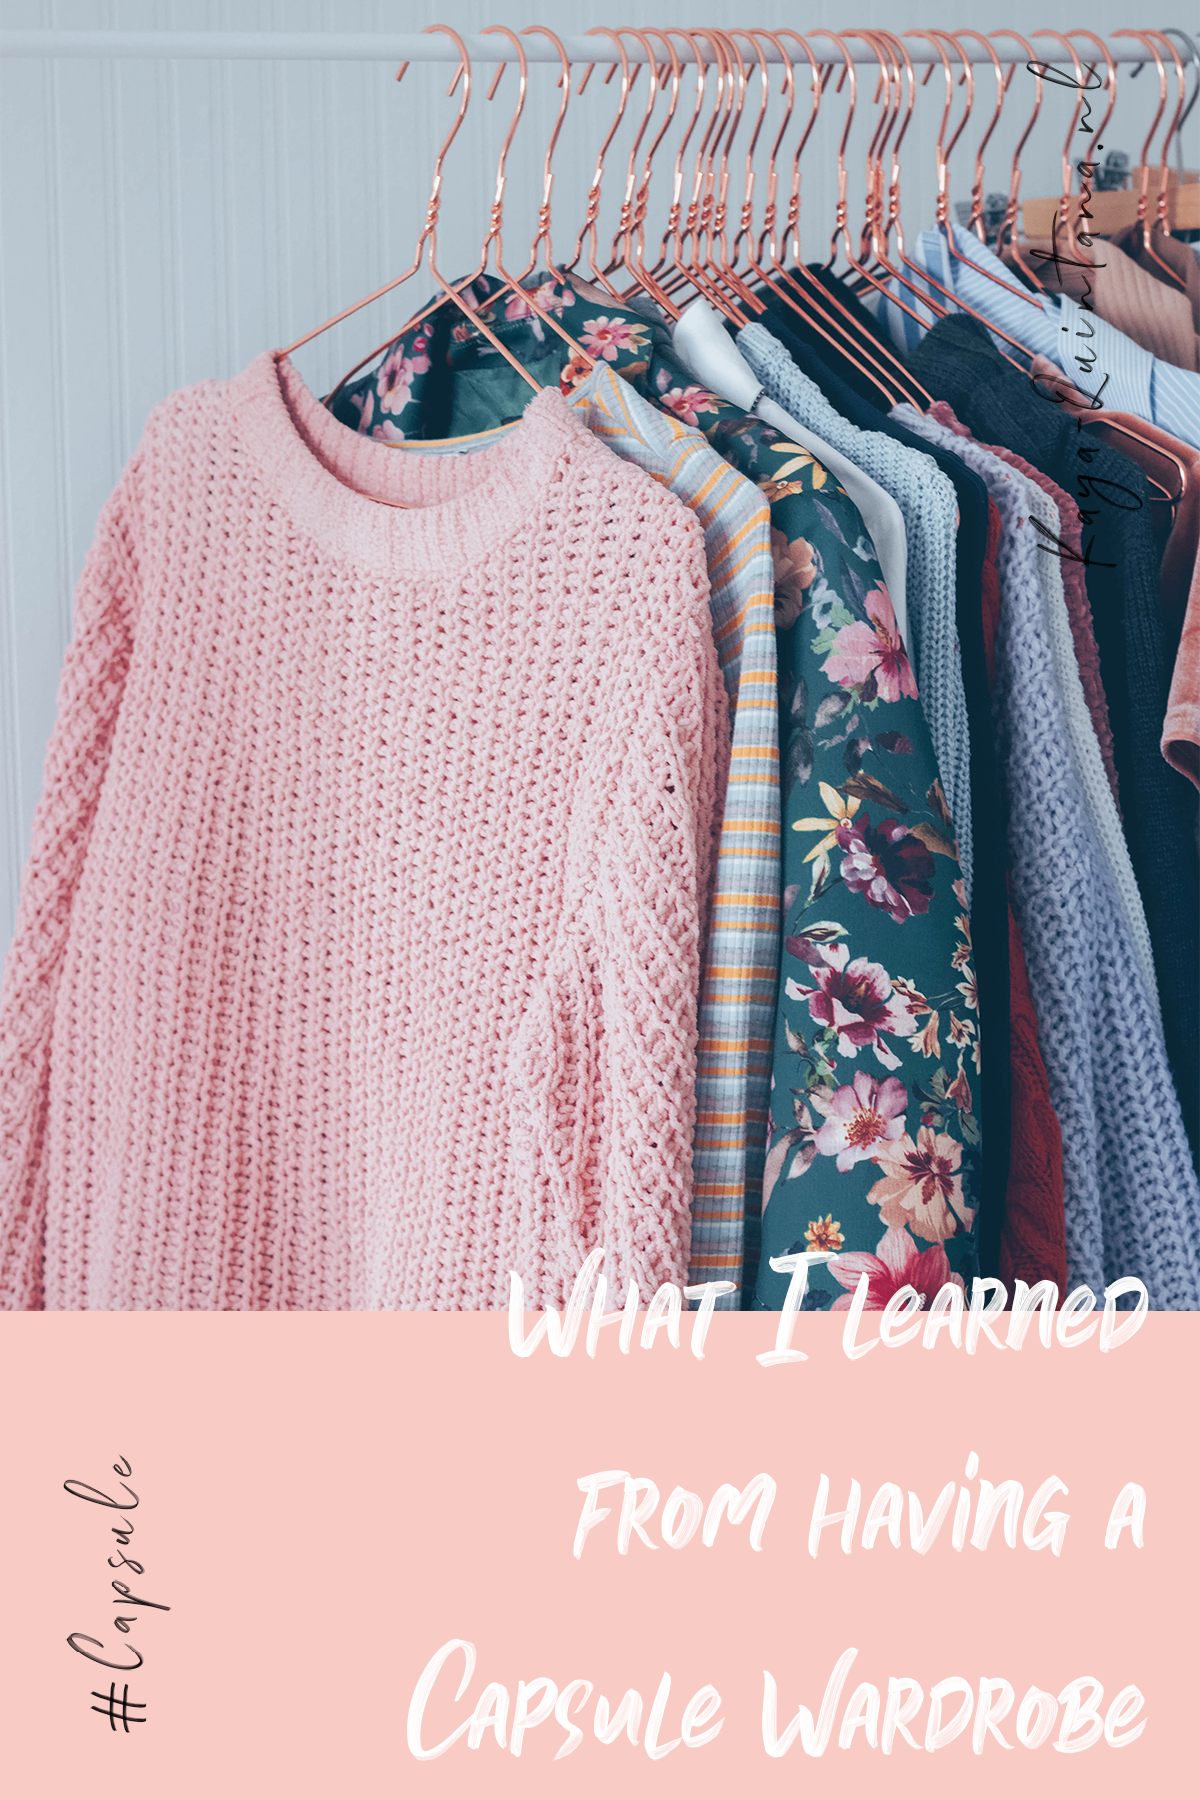 What I learned from having a capsule wardrobe